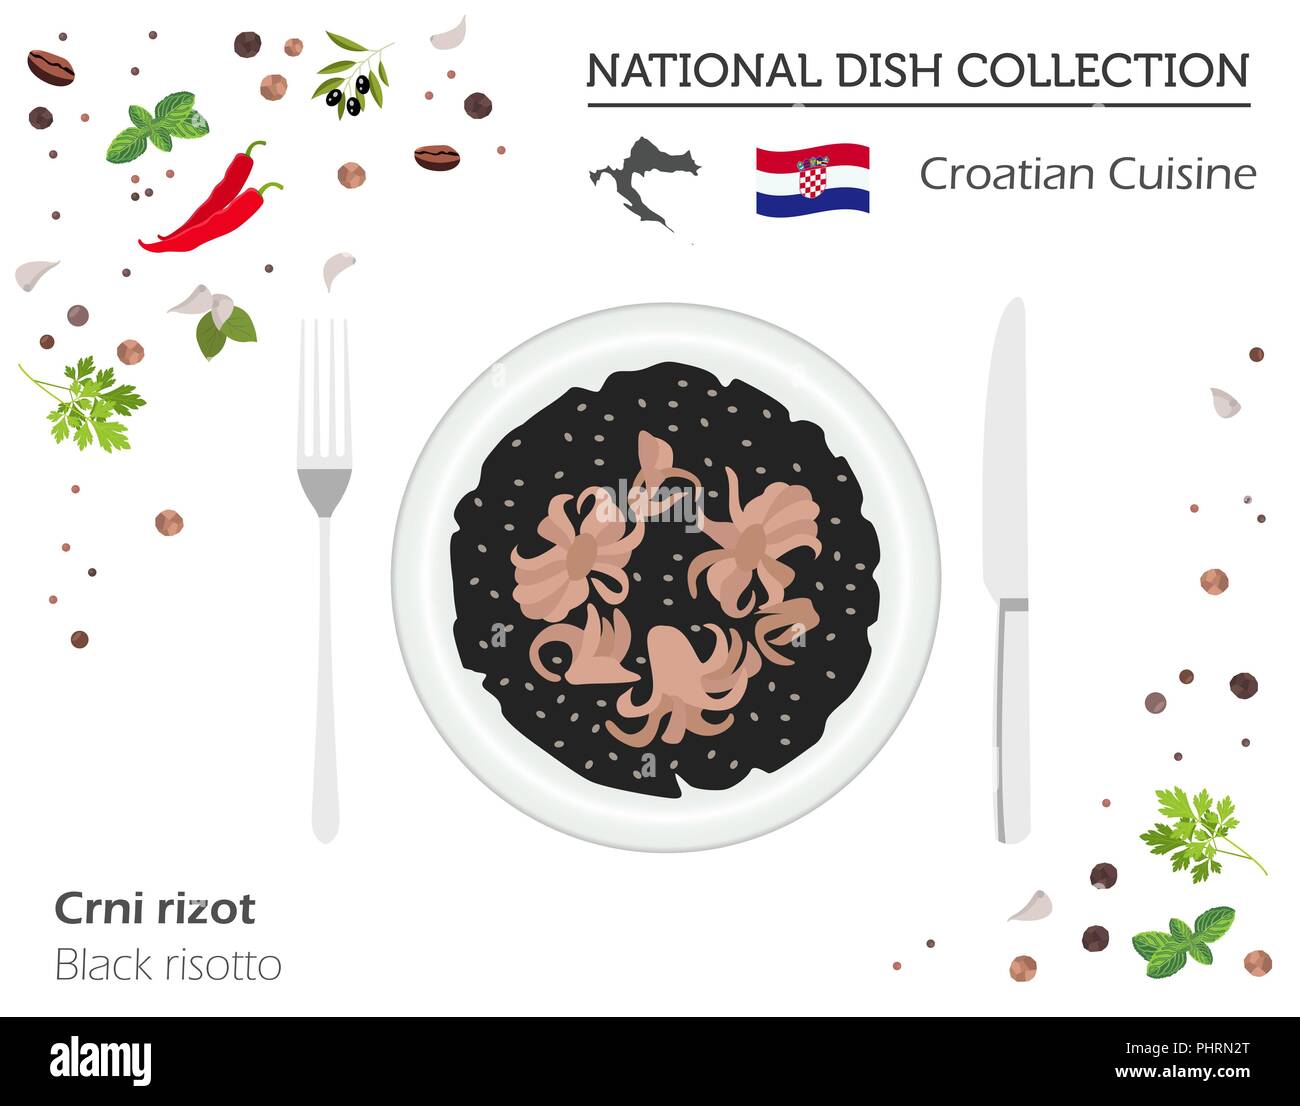 Croatian Cuisine. European national dish collection. Black risotto isolated on white, infographic. Vector illustration Stock Vector